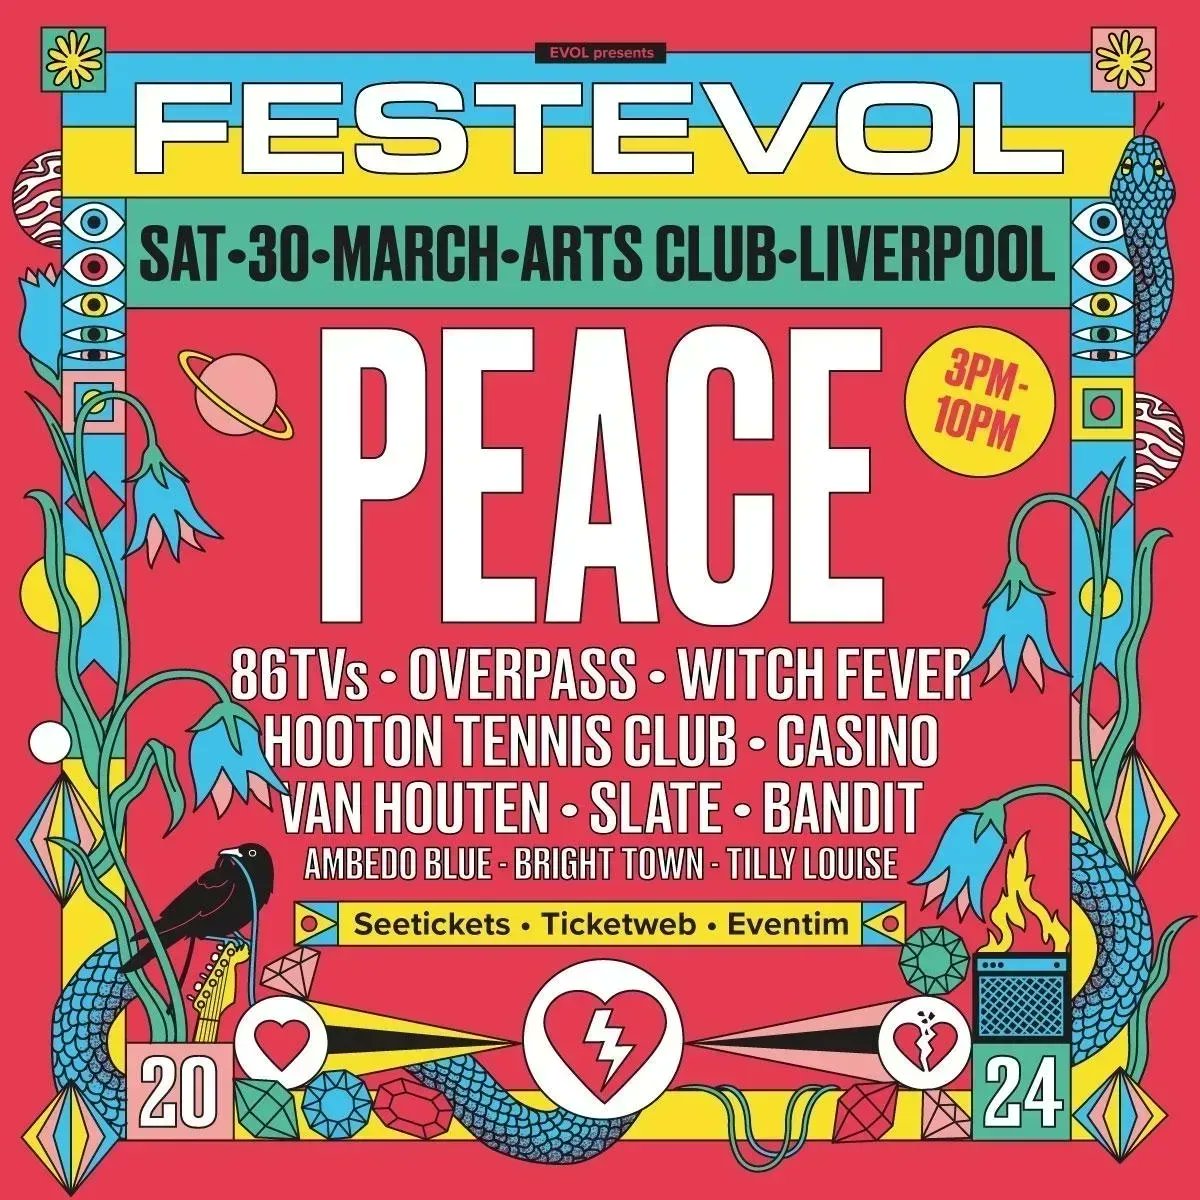 #FestEvol24 is this Saturday!

🎟 Get your tickets NOW: seetickets.com/event/festevol…